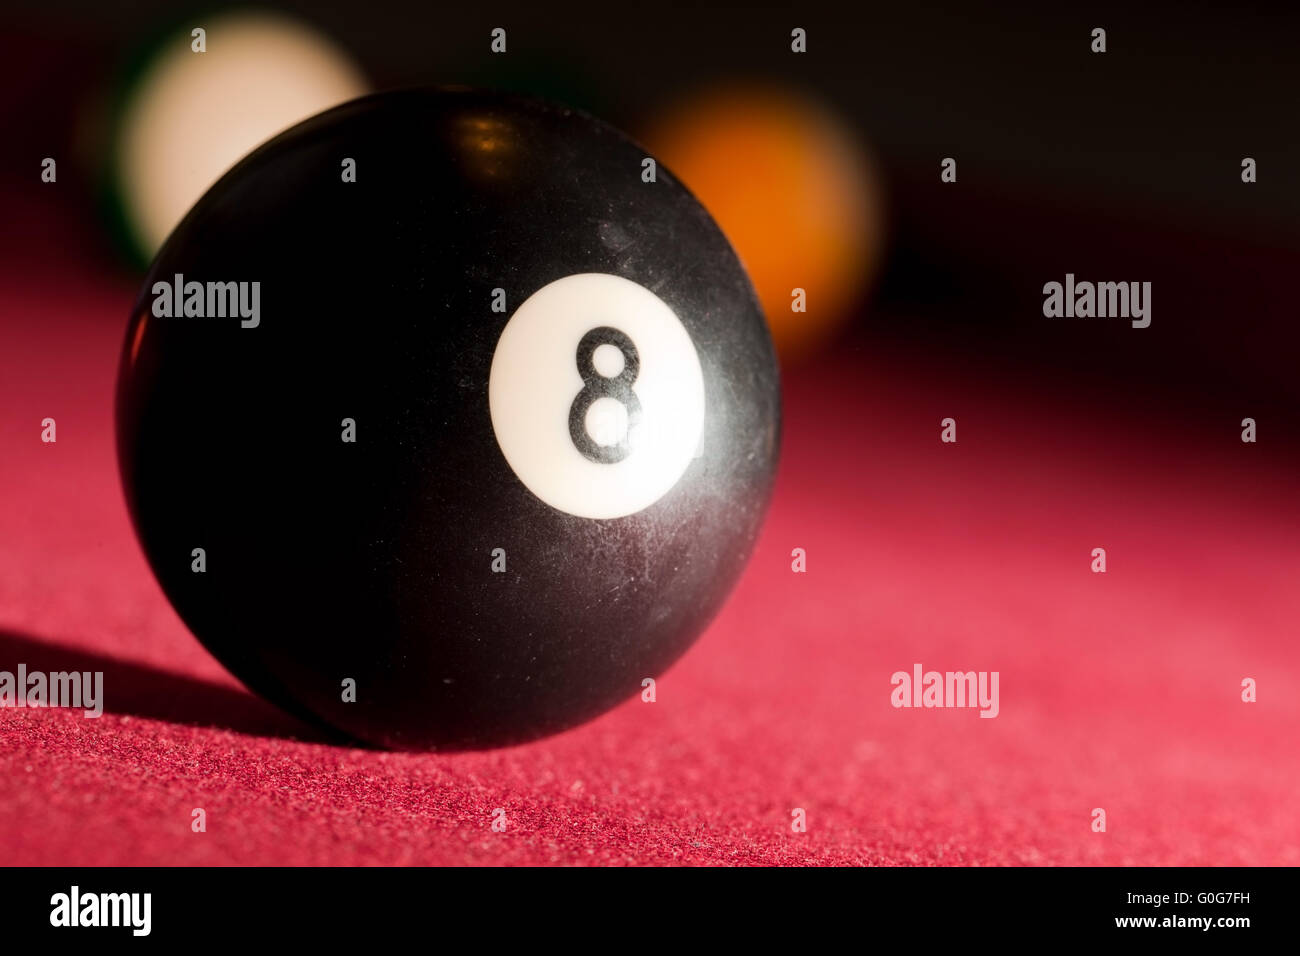 Billards pool or snooker game. The black eight ball. Red cloth table Stock Photo